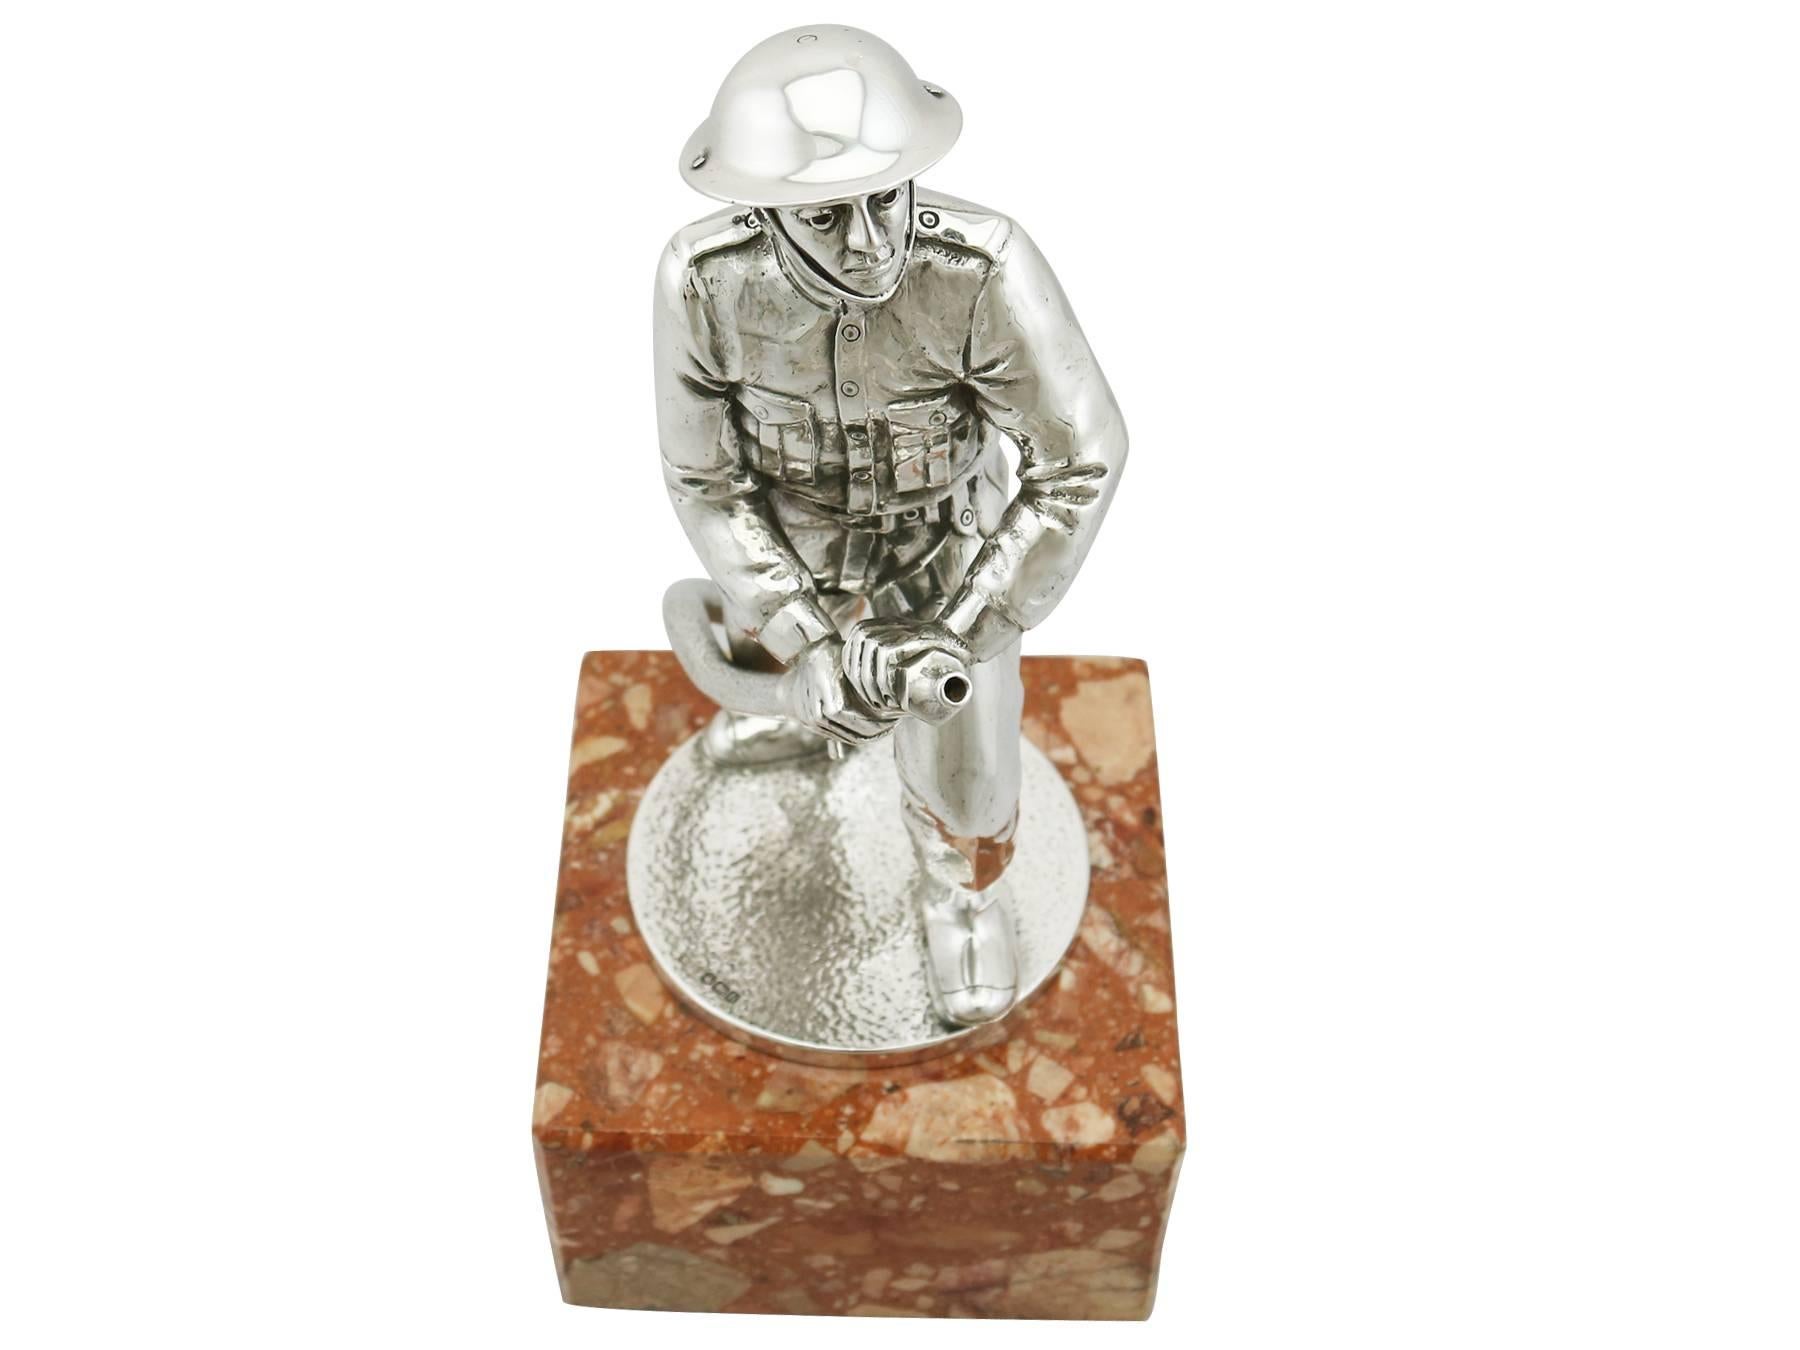 Mid-20th Century 1955 Sterling Silver Fireman Ornament Trophy by Walker & Hall